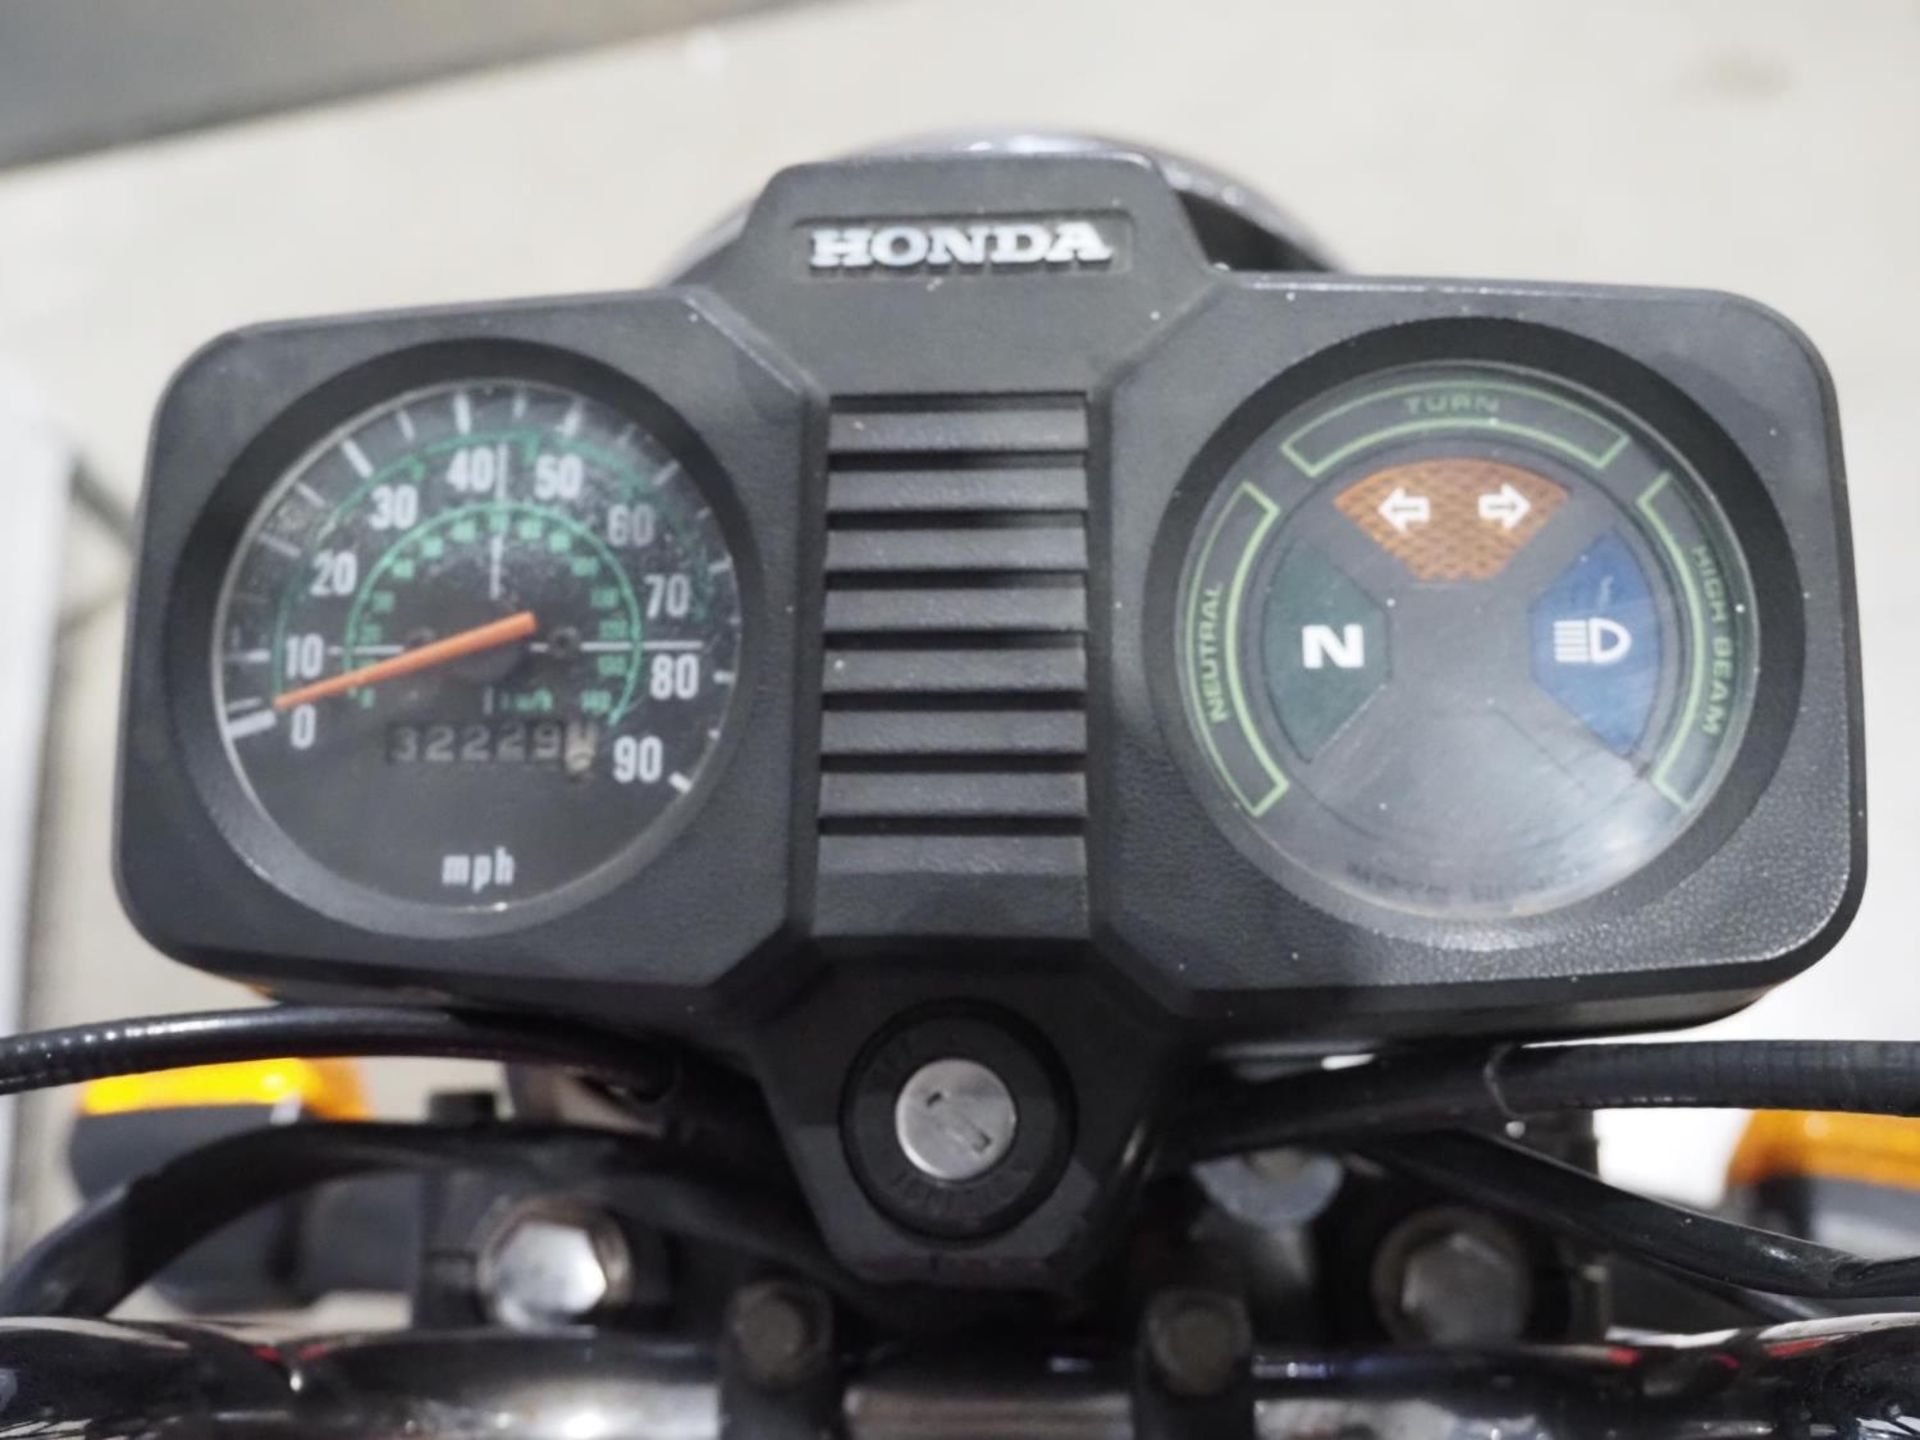 Honda CG125 motorcycle. 1998. 124cc. MOT until 27.03.2023. Starts and runs. Engine number does not - Image 3 of 6